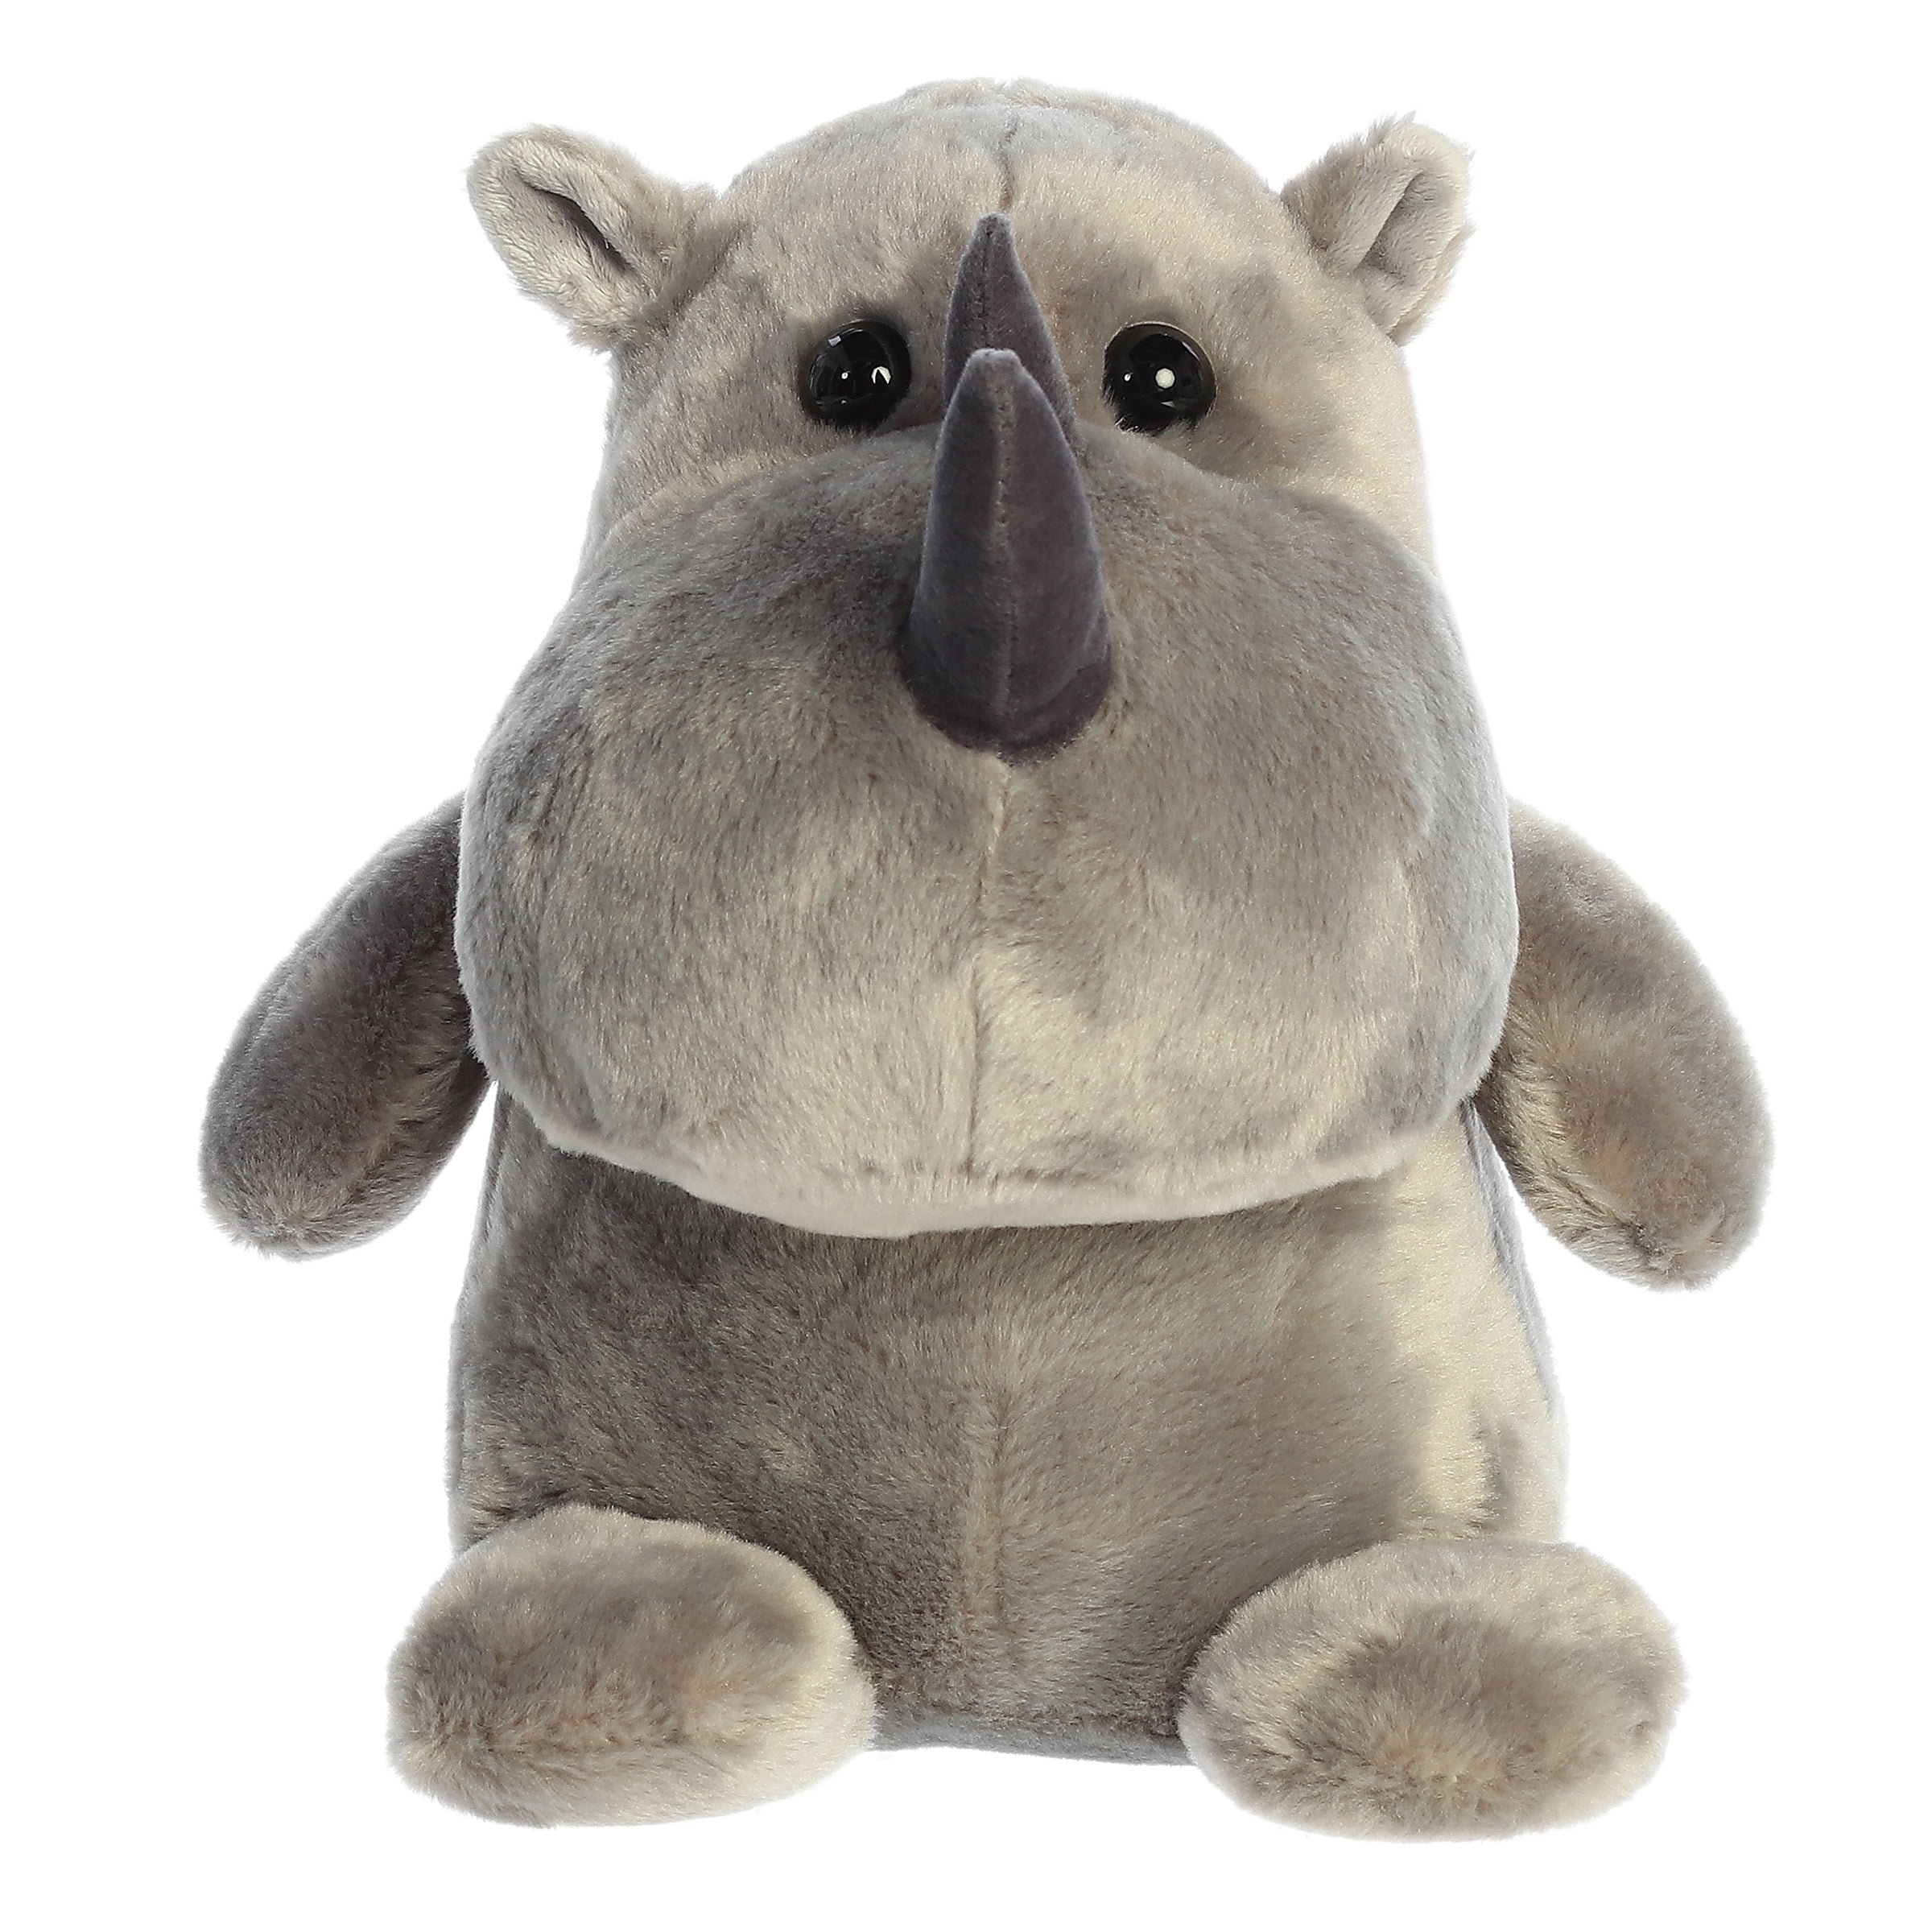 Rhino plush in a dark gray coat, showcasing a prominent snout and majestic horn, from Happy Hippo And Friends collection.